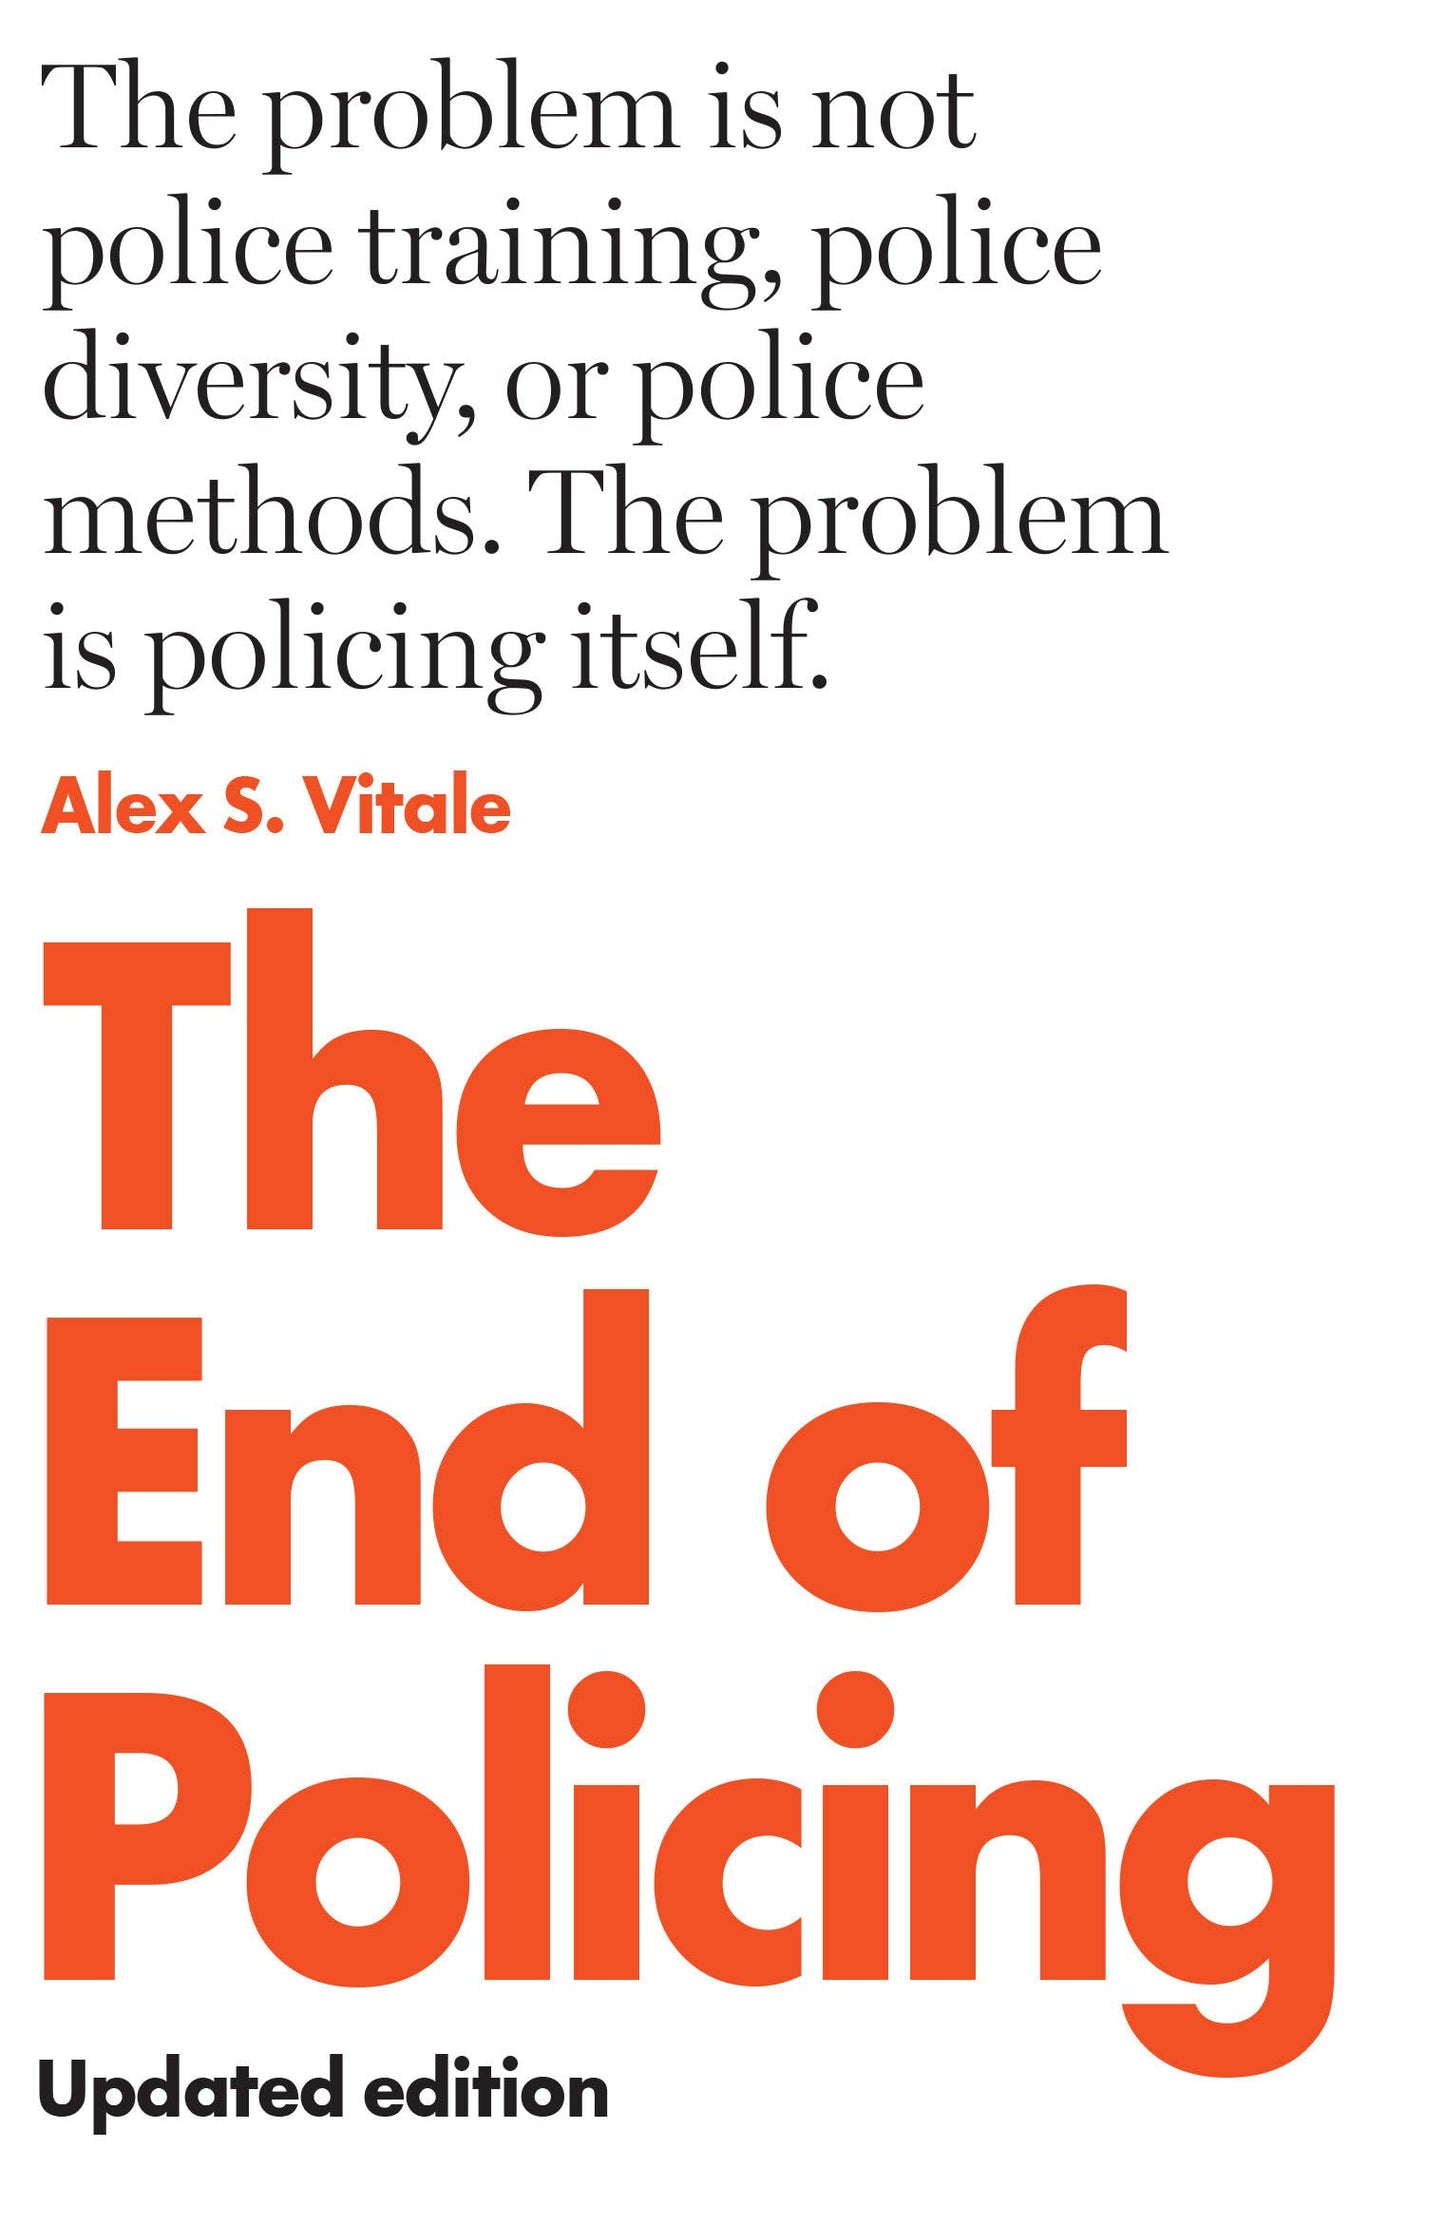 The End of Policing, by Alex S. Vitale